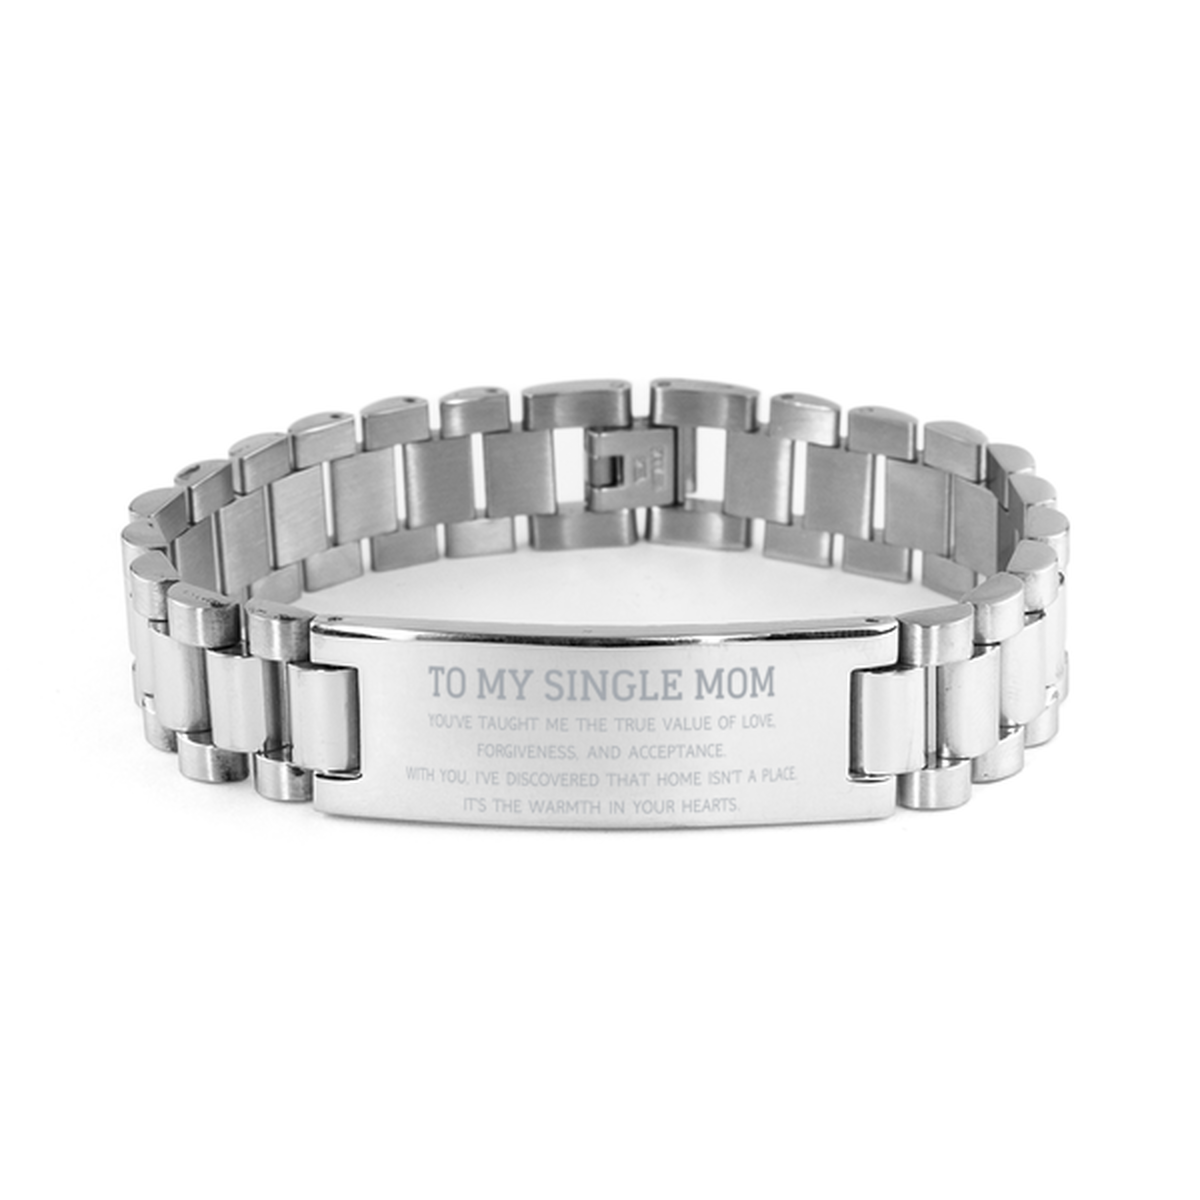 To My Single Mom Gifts, You've taught me the true value of love, Thank You Gifts For Single Mom, Birthday Ladder Stainless Steel Bracelet For Single Mom